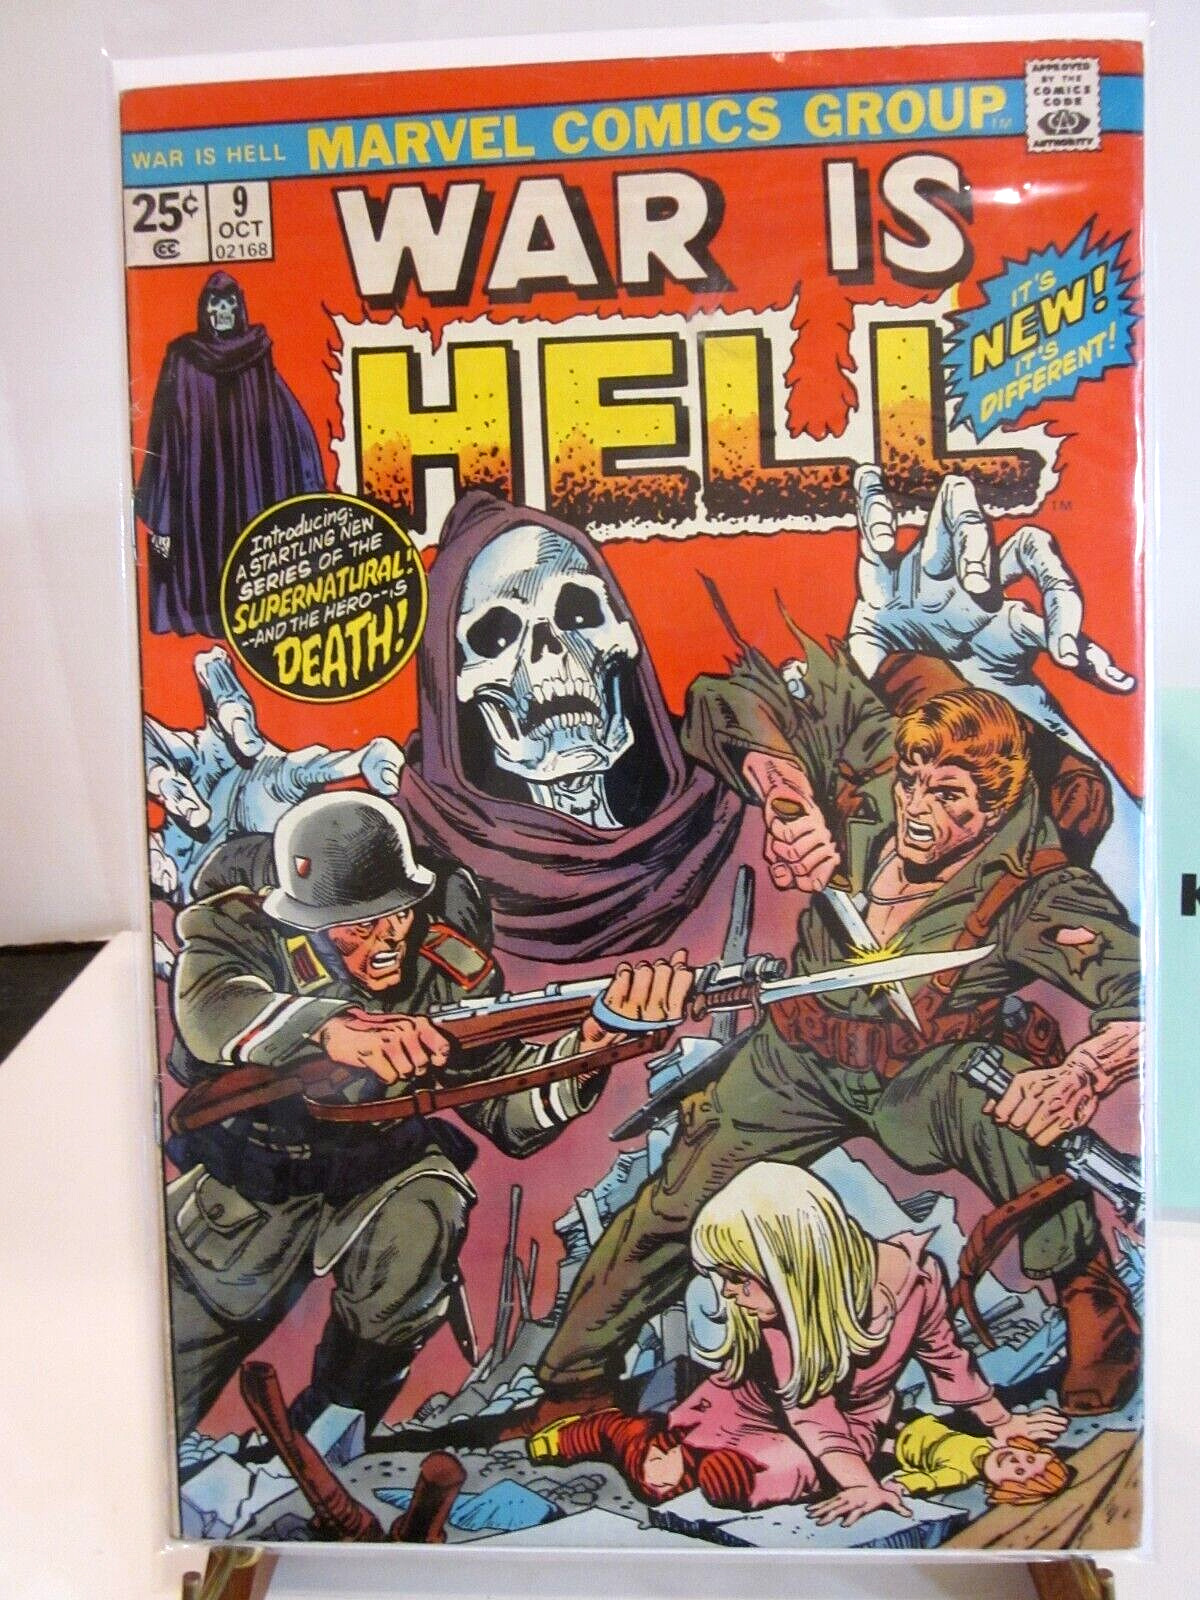 MARVEL COMICS WAR IS HELL NO. 9, 1974, FIRST APPEARANCE DEATH UNGRADED